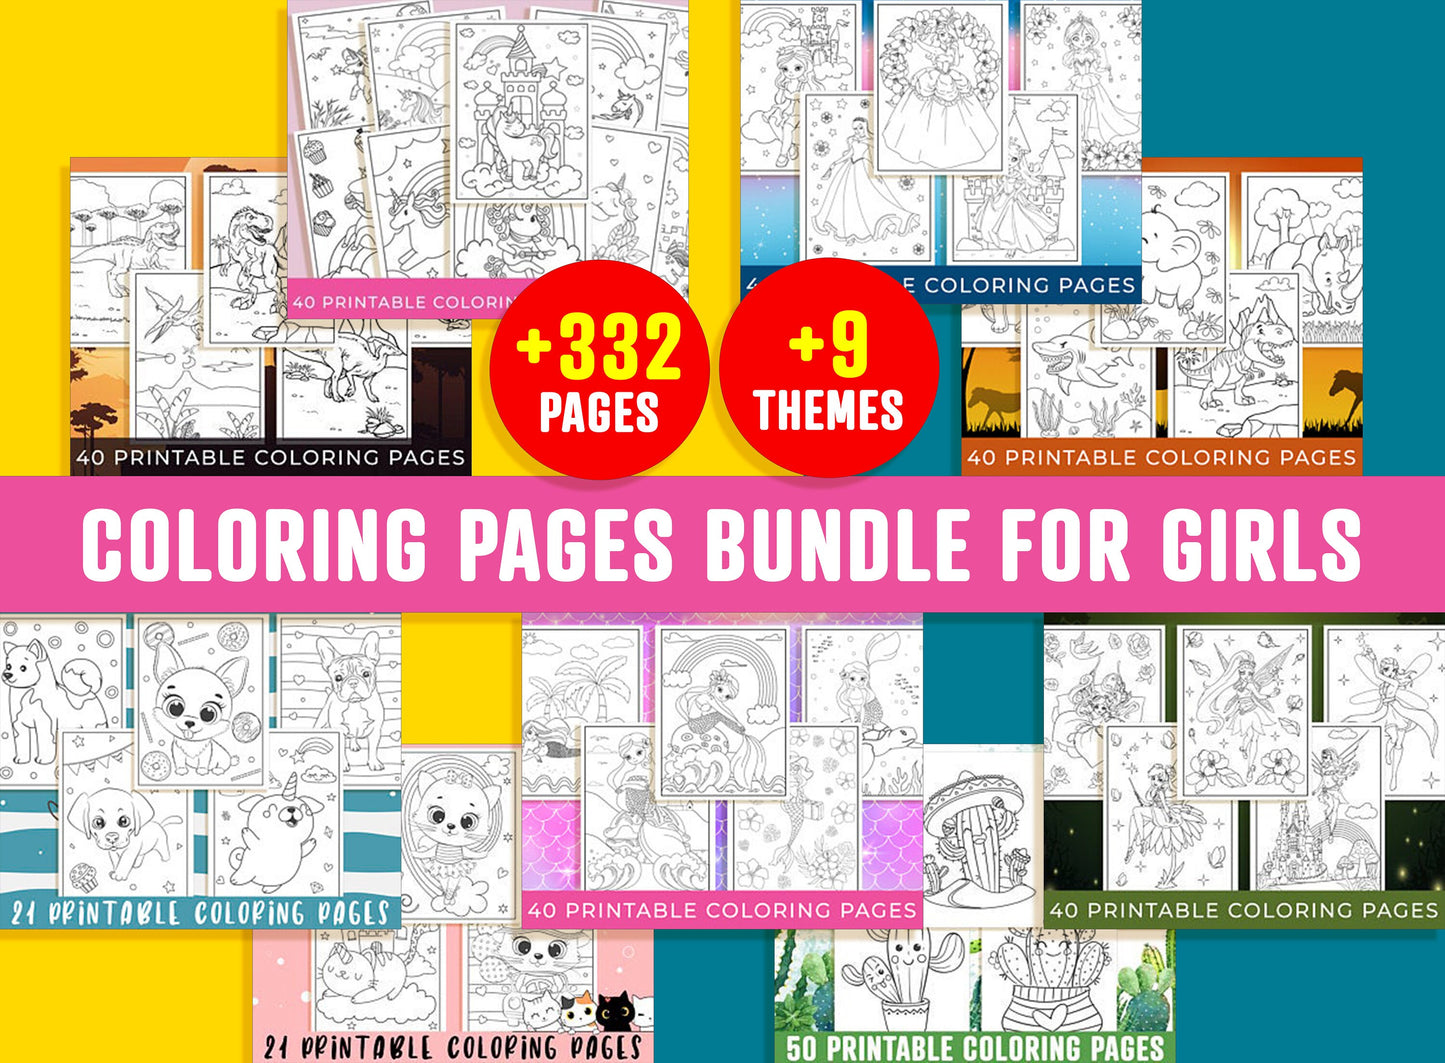 Coloring Pages Bundle For Girls, Over 9 Themes, 332 Printable Coloring Pages for Kids, Girls,  Save Big - Instant Download.